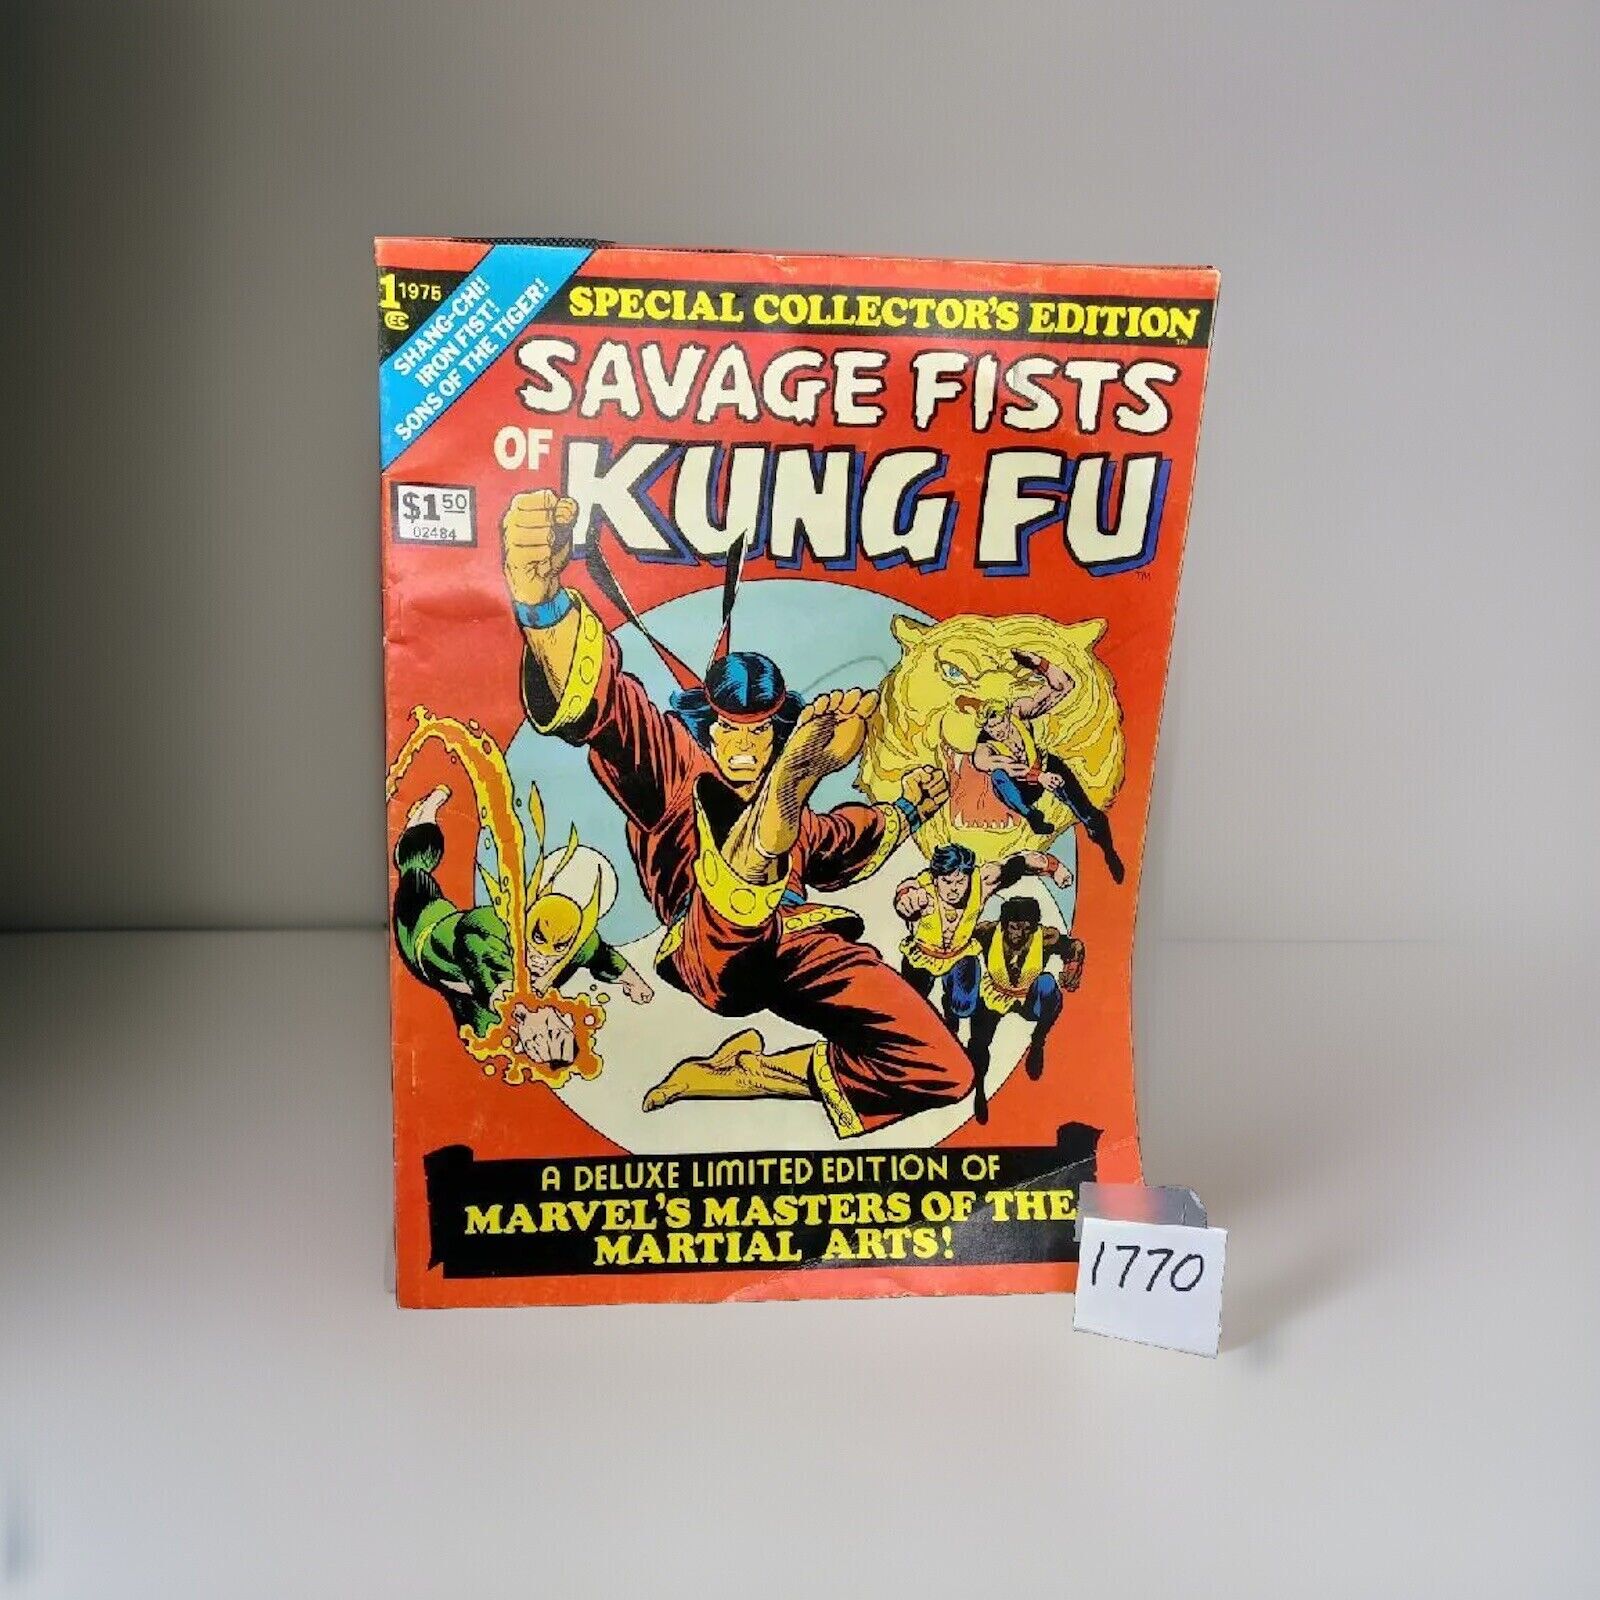 1975 SAVAGE FISTS OF KUNG FU SPECIAL COLLECTION EDITION - Treasury Edition #1